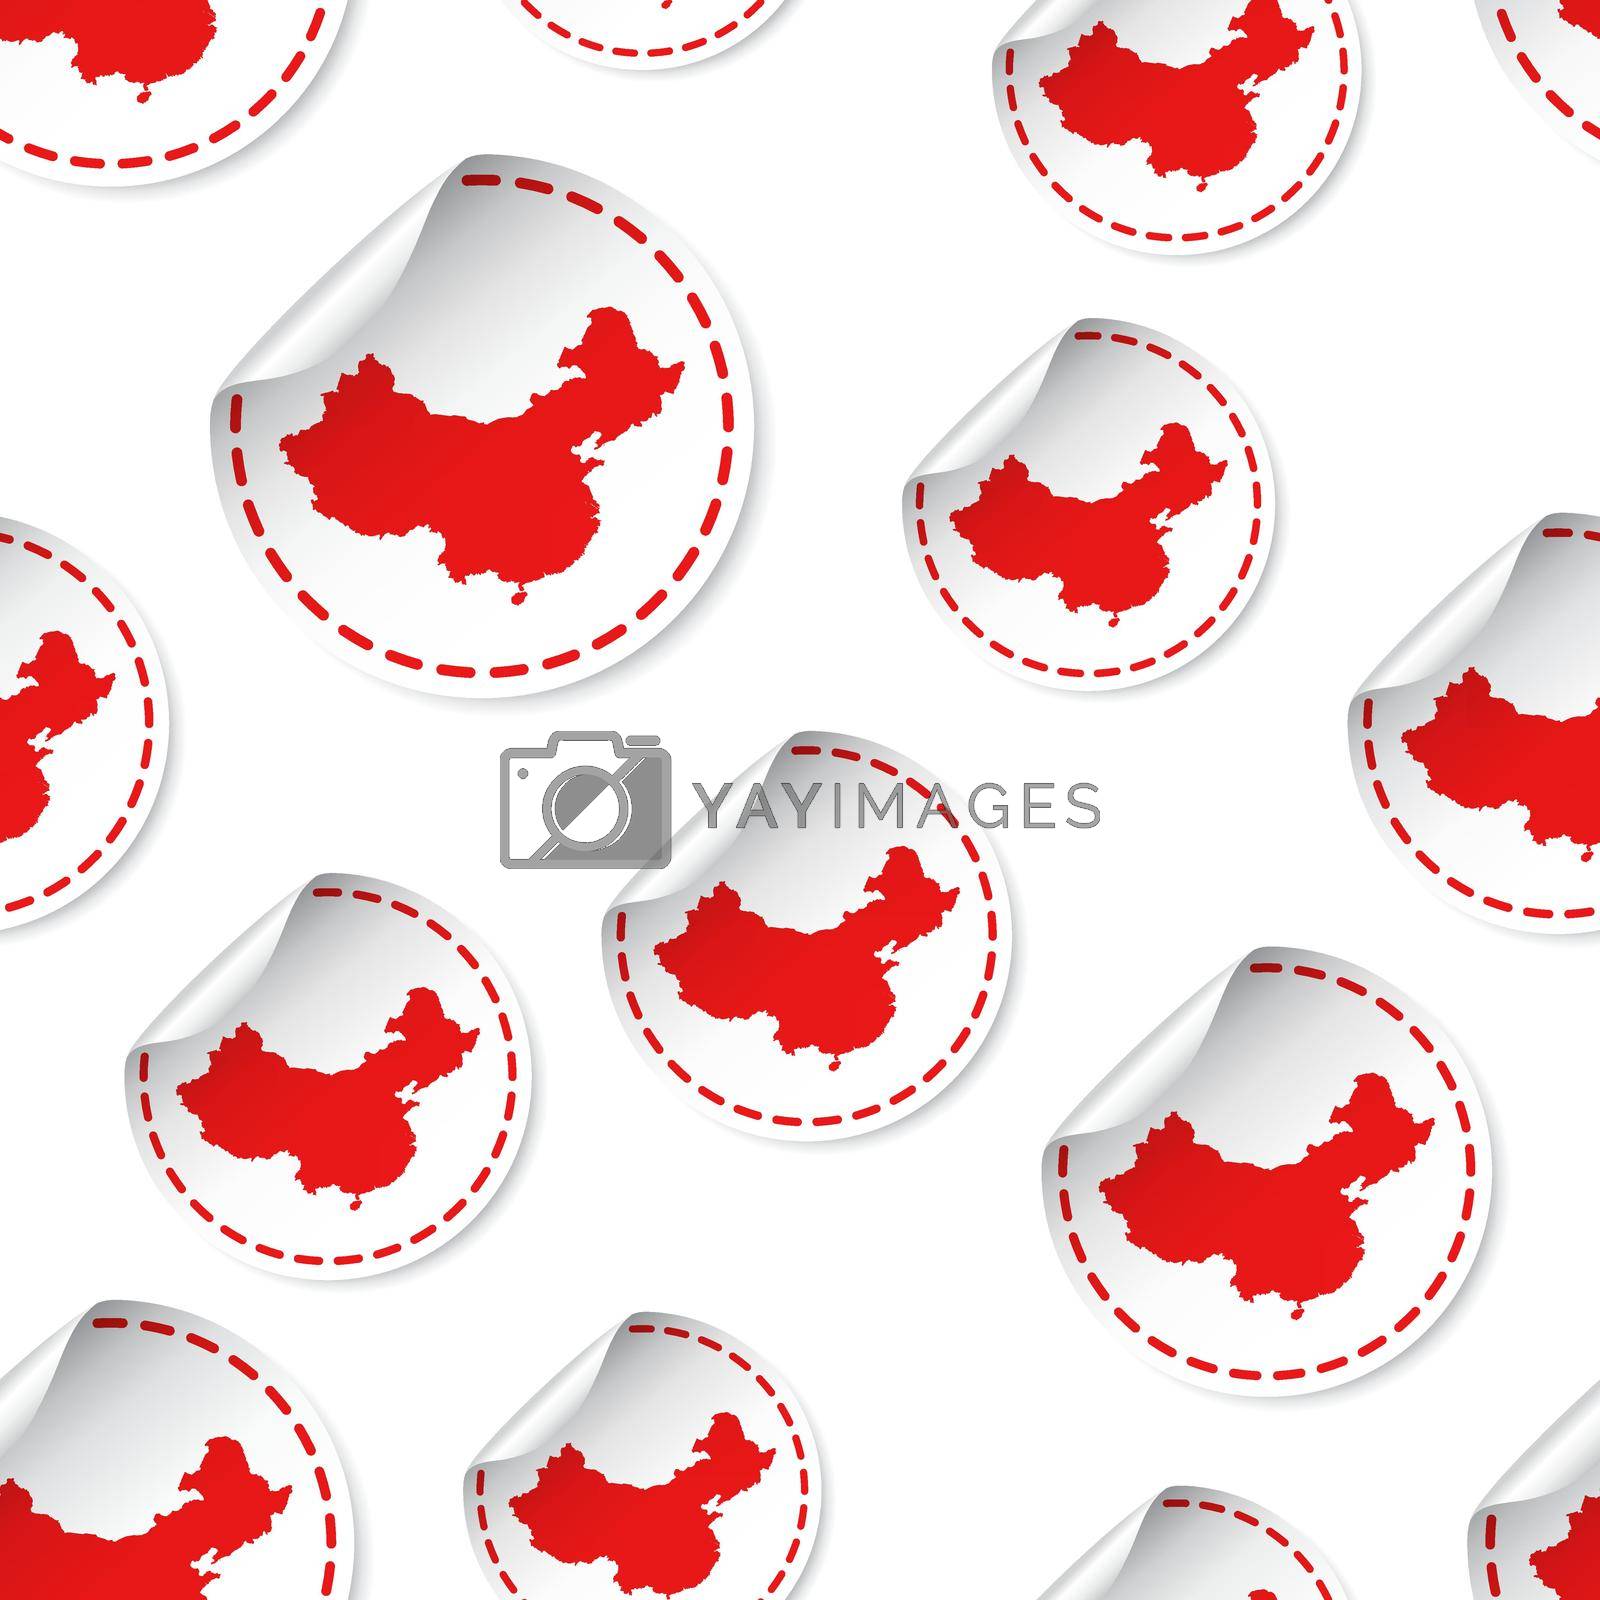 Royalty free image of China map sticker seamless pattern background. Business concept label pictogram. China map symbol pattern. by LysenkoA